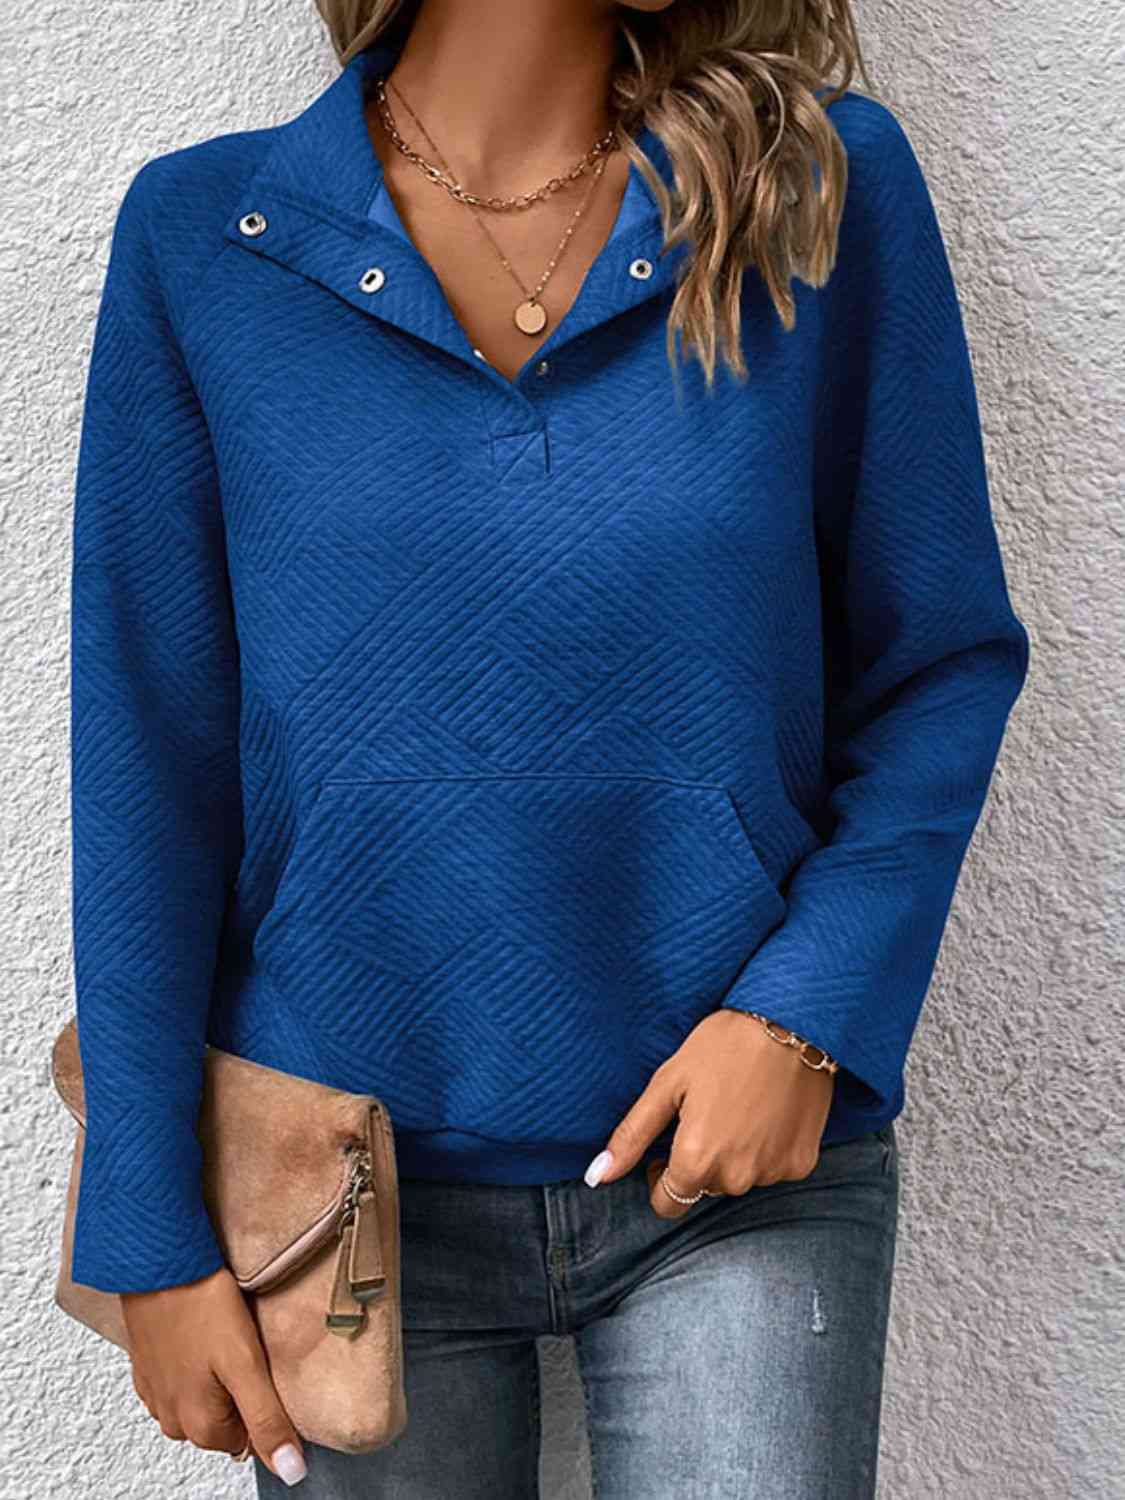 Half Buttoned Collared Neck Sweatshirt with Pocket - Dixie Hike & Style